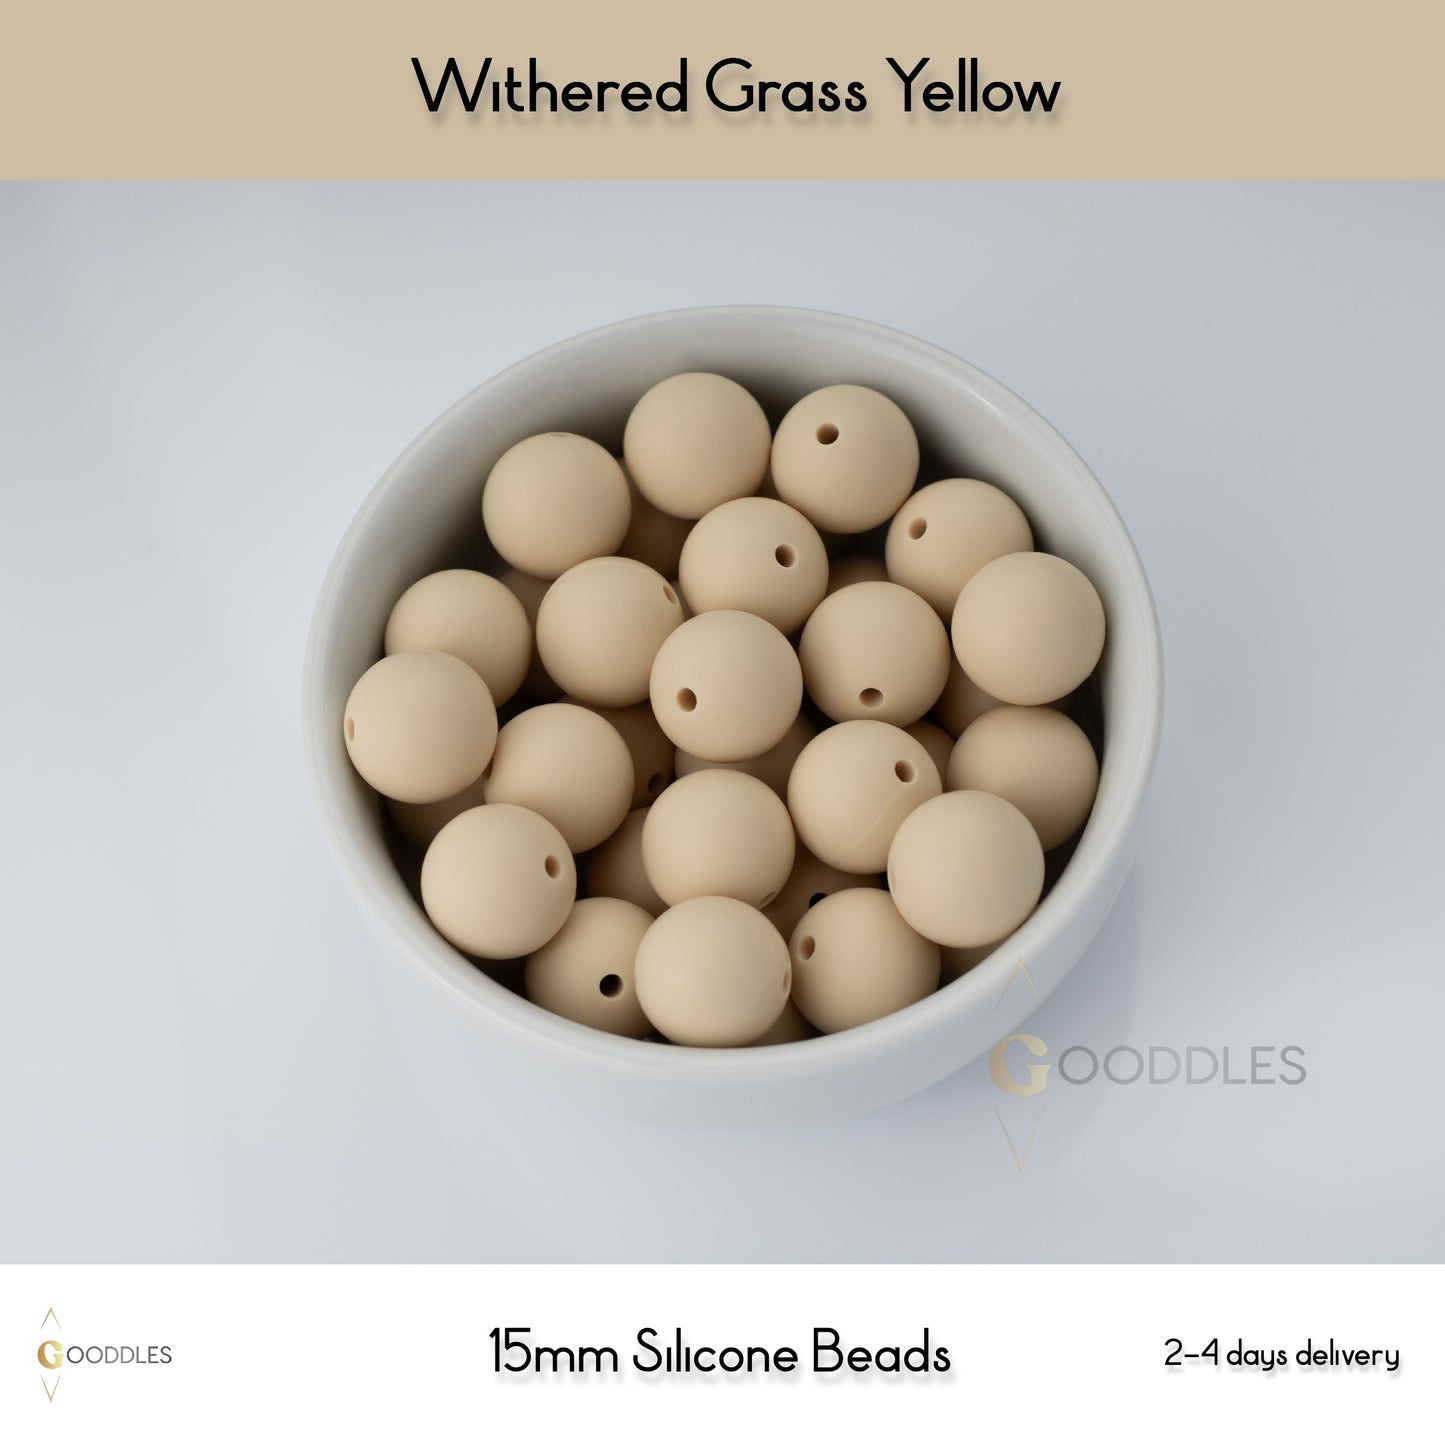 5pcs, Withered Grass Yellow Silicone Beads Round Silicone Beads